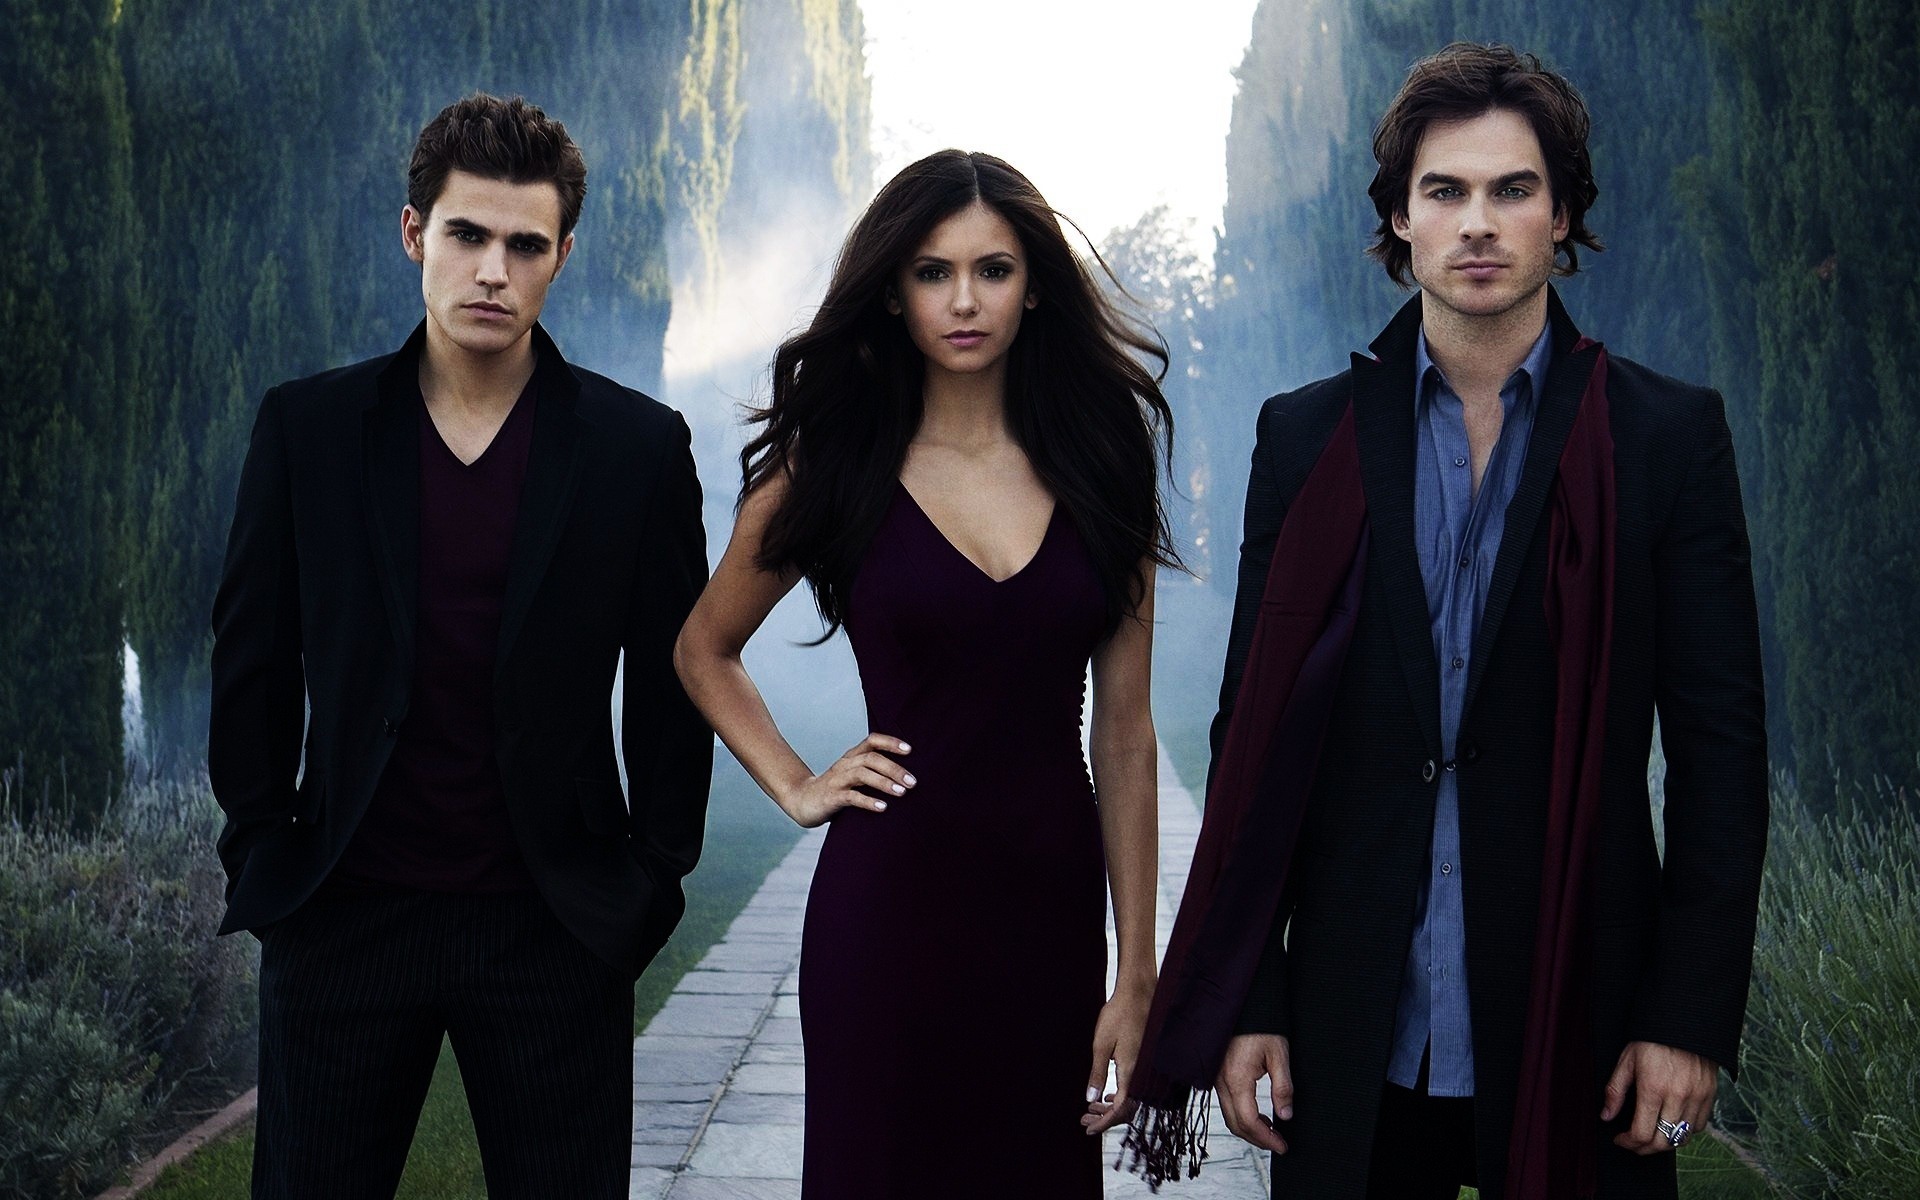 The Vampire Diaries wallpapers HD #6 - 1920x1200